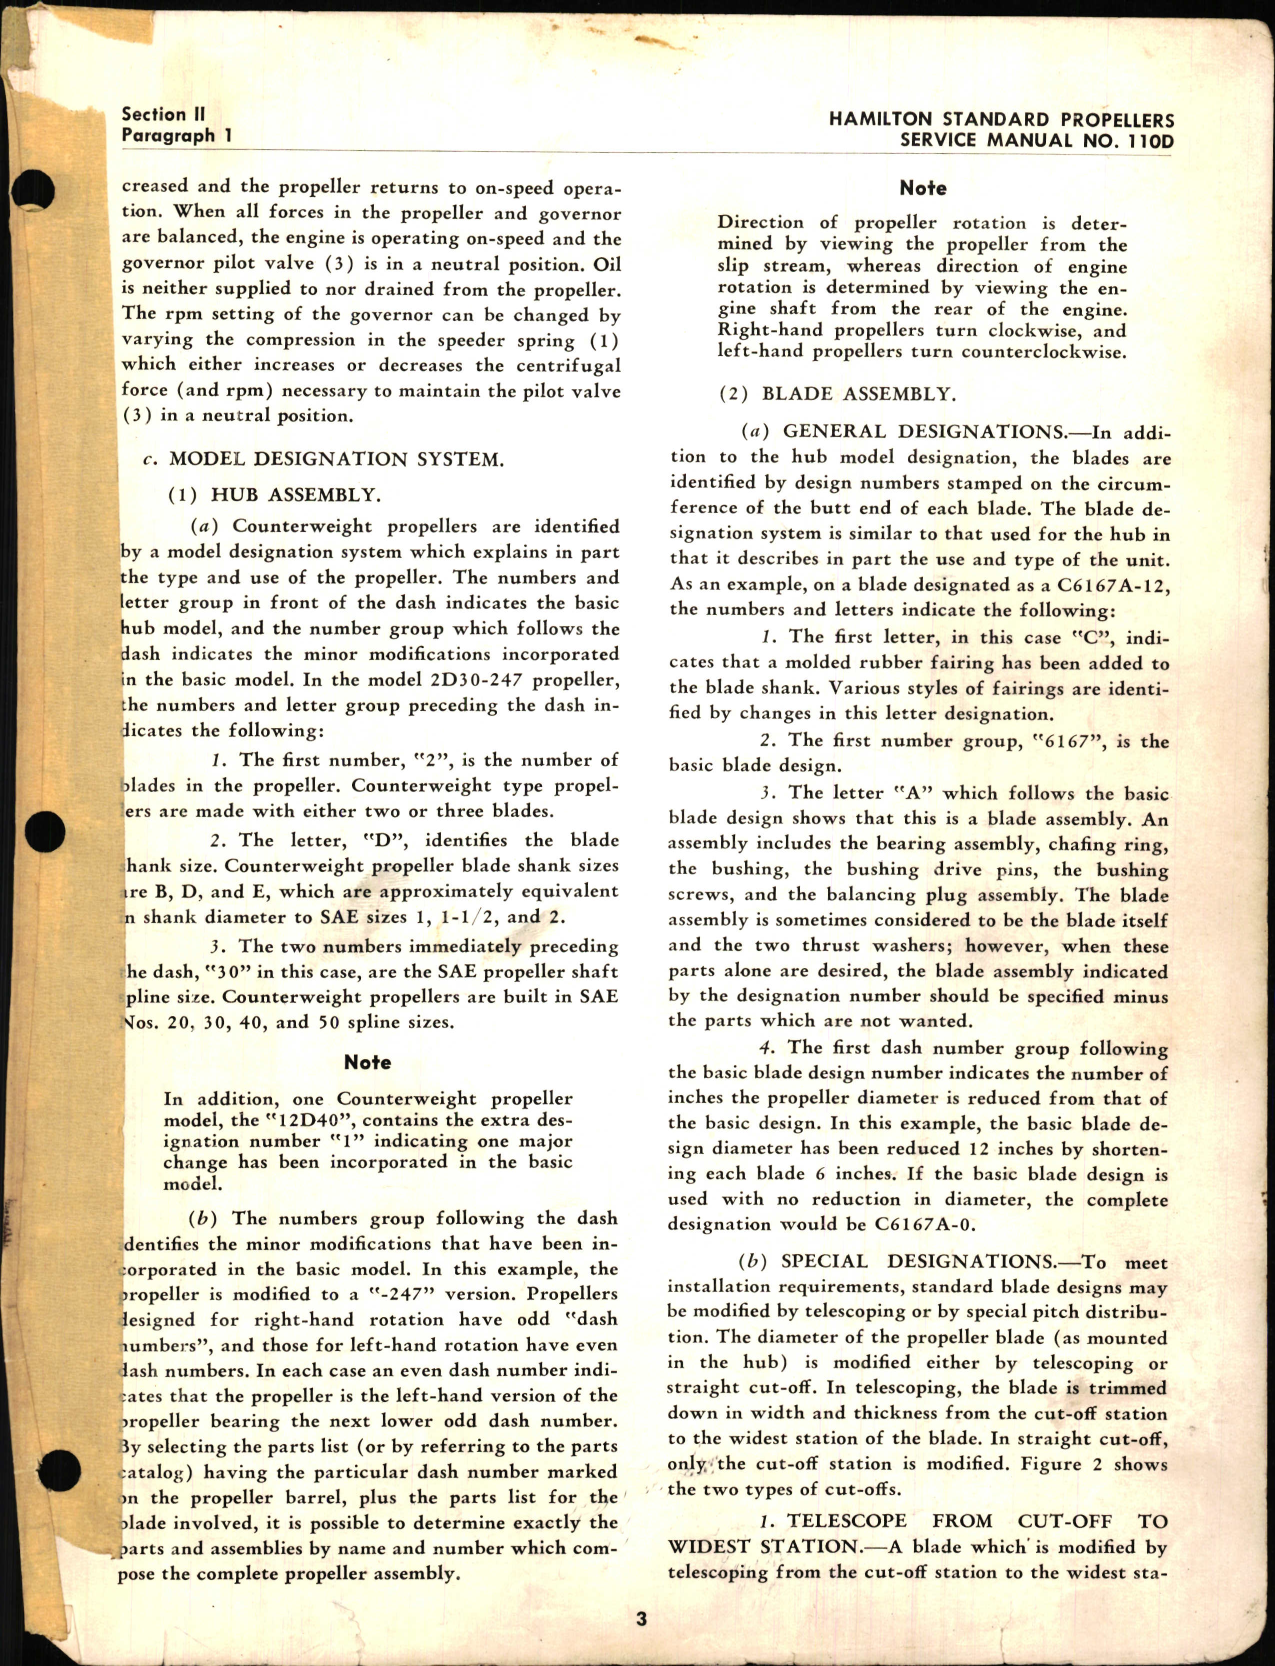 Sample page 6 from AirCorps Library document: Service Manual for Hamilton Standard Propellers